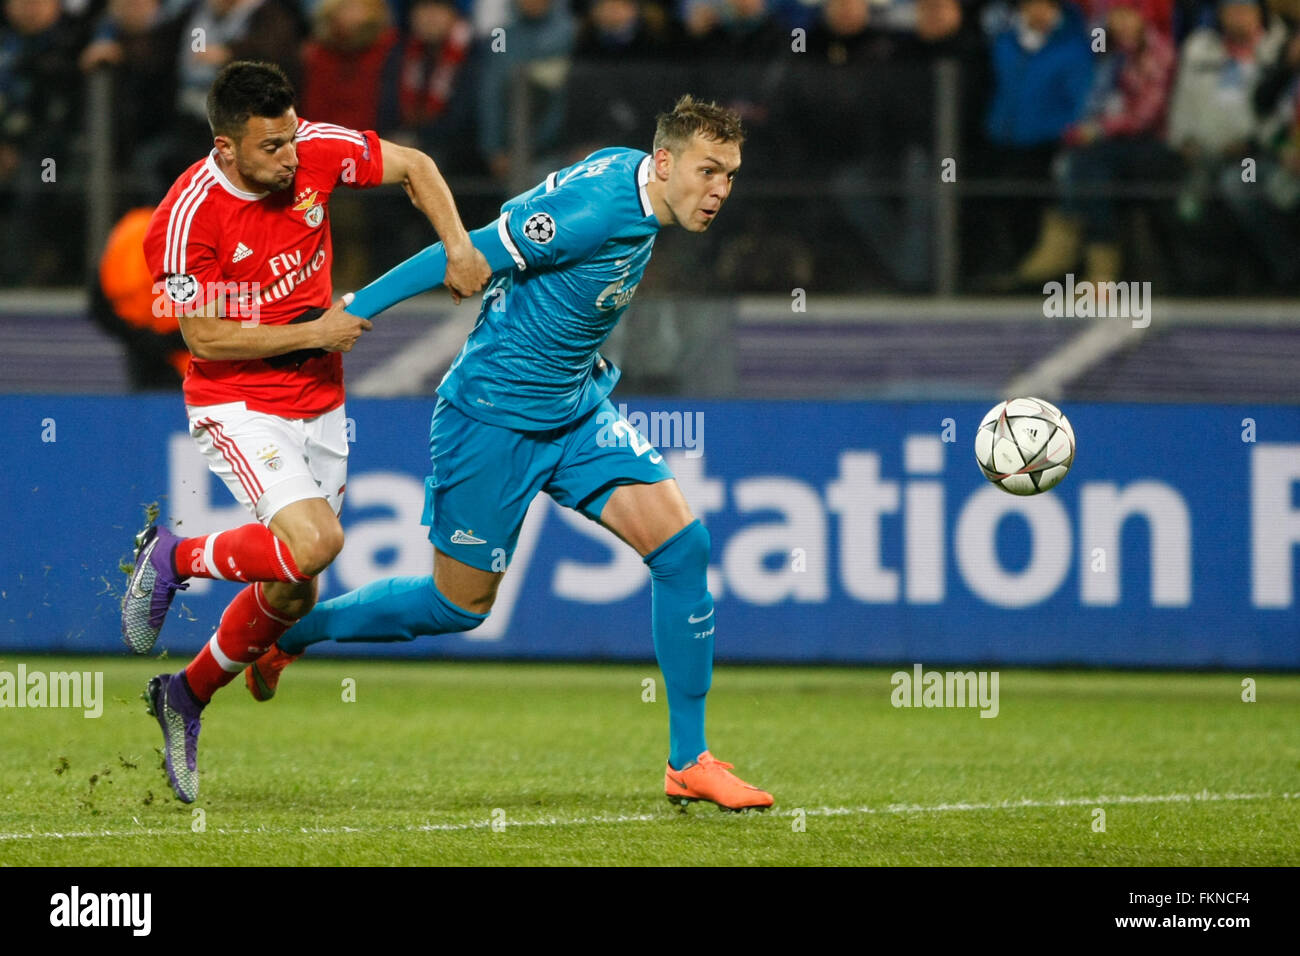 St. Petersburg, Russia. 9th March, 2016. Artem Dzyuba (R) of Zenit and Andreas Samaris of Benfica vie for the ball during the UEFA Champions League Round of 16 second leg match between FC Zenit St. Petersburg and SL Benfica at Petrovsky stadium. Credit:  Mike Kireev/Alamy Live News Stock Photo